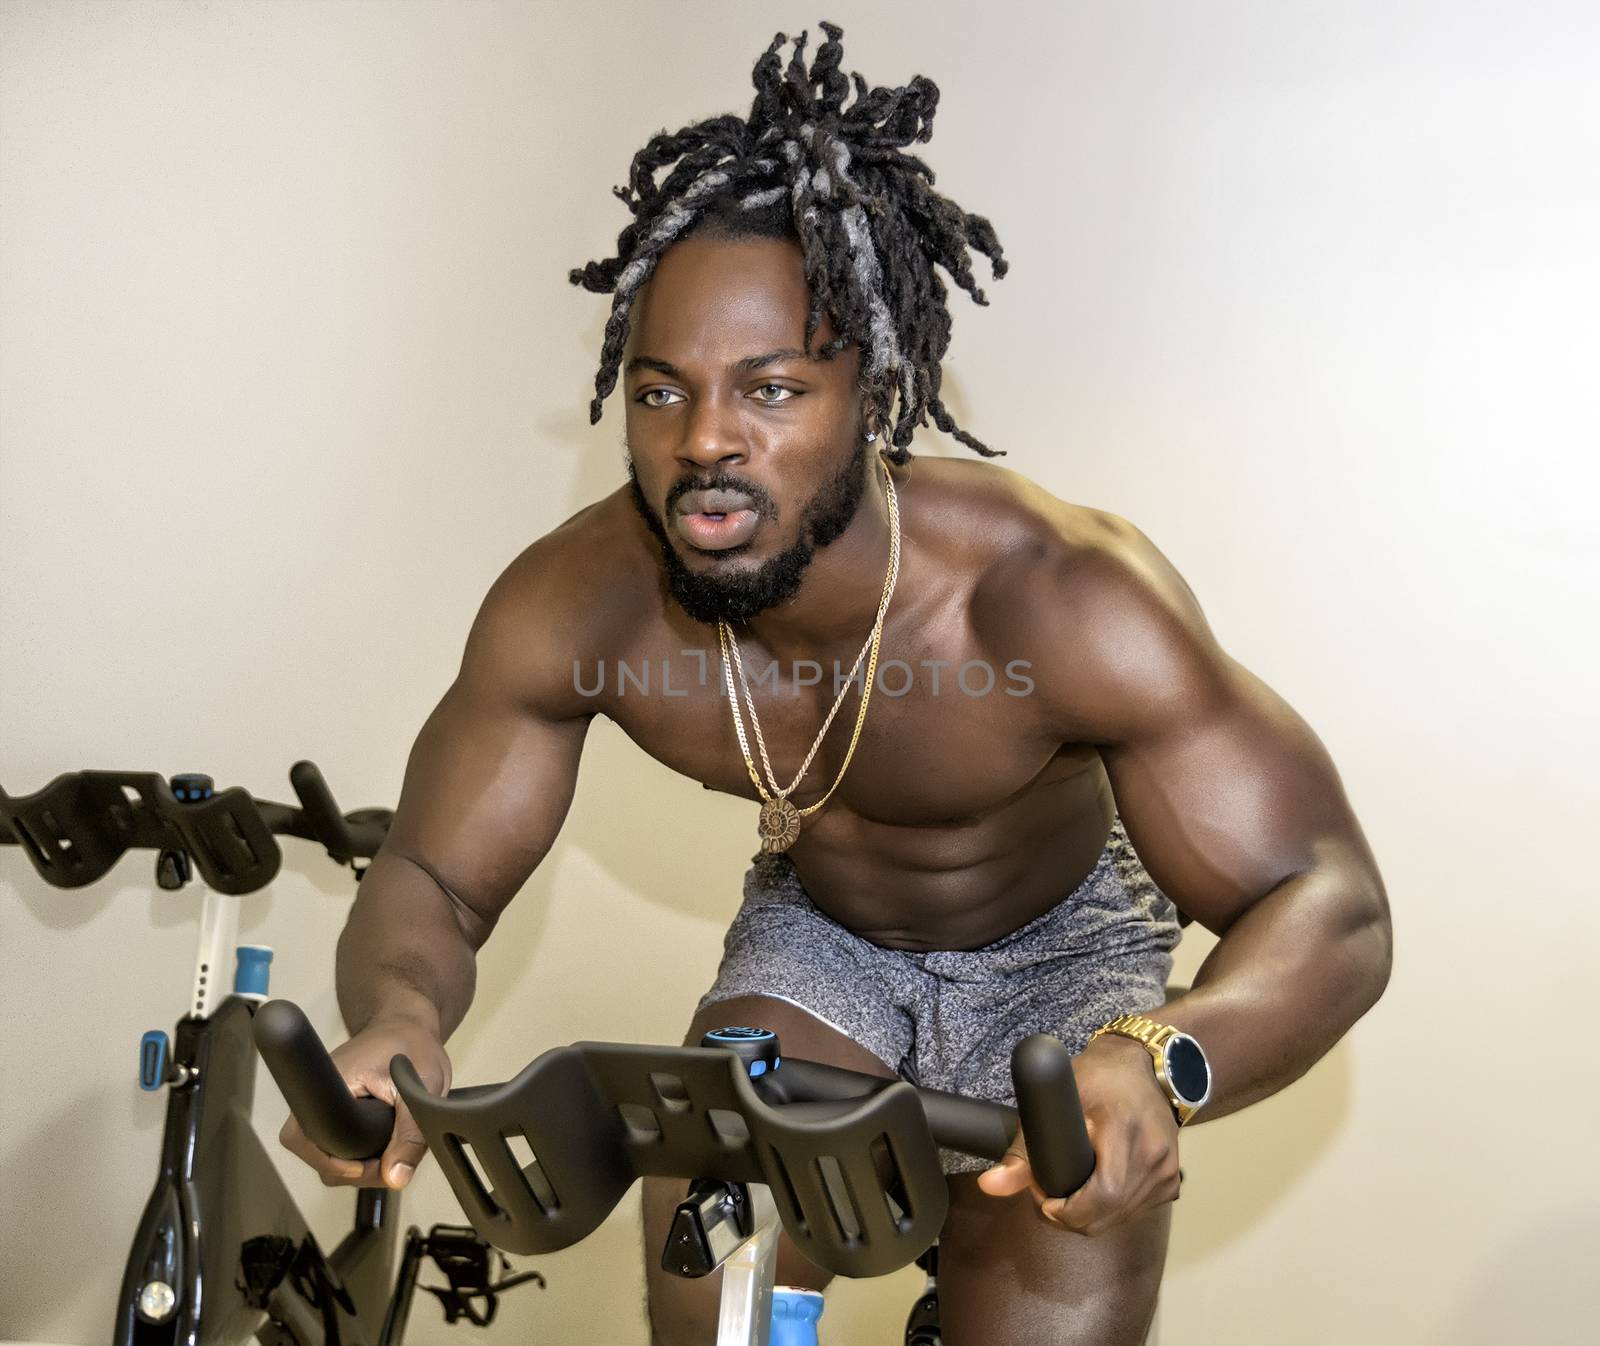 Bodybuilder Riding a Stationary Bicycle by whitechild